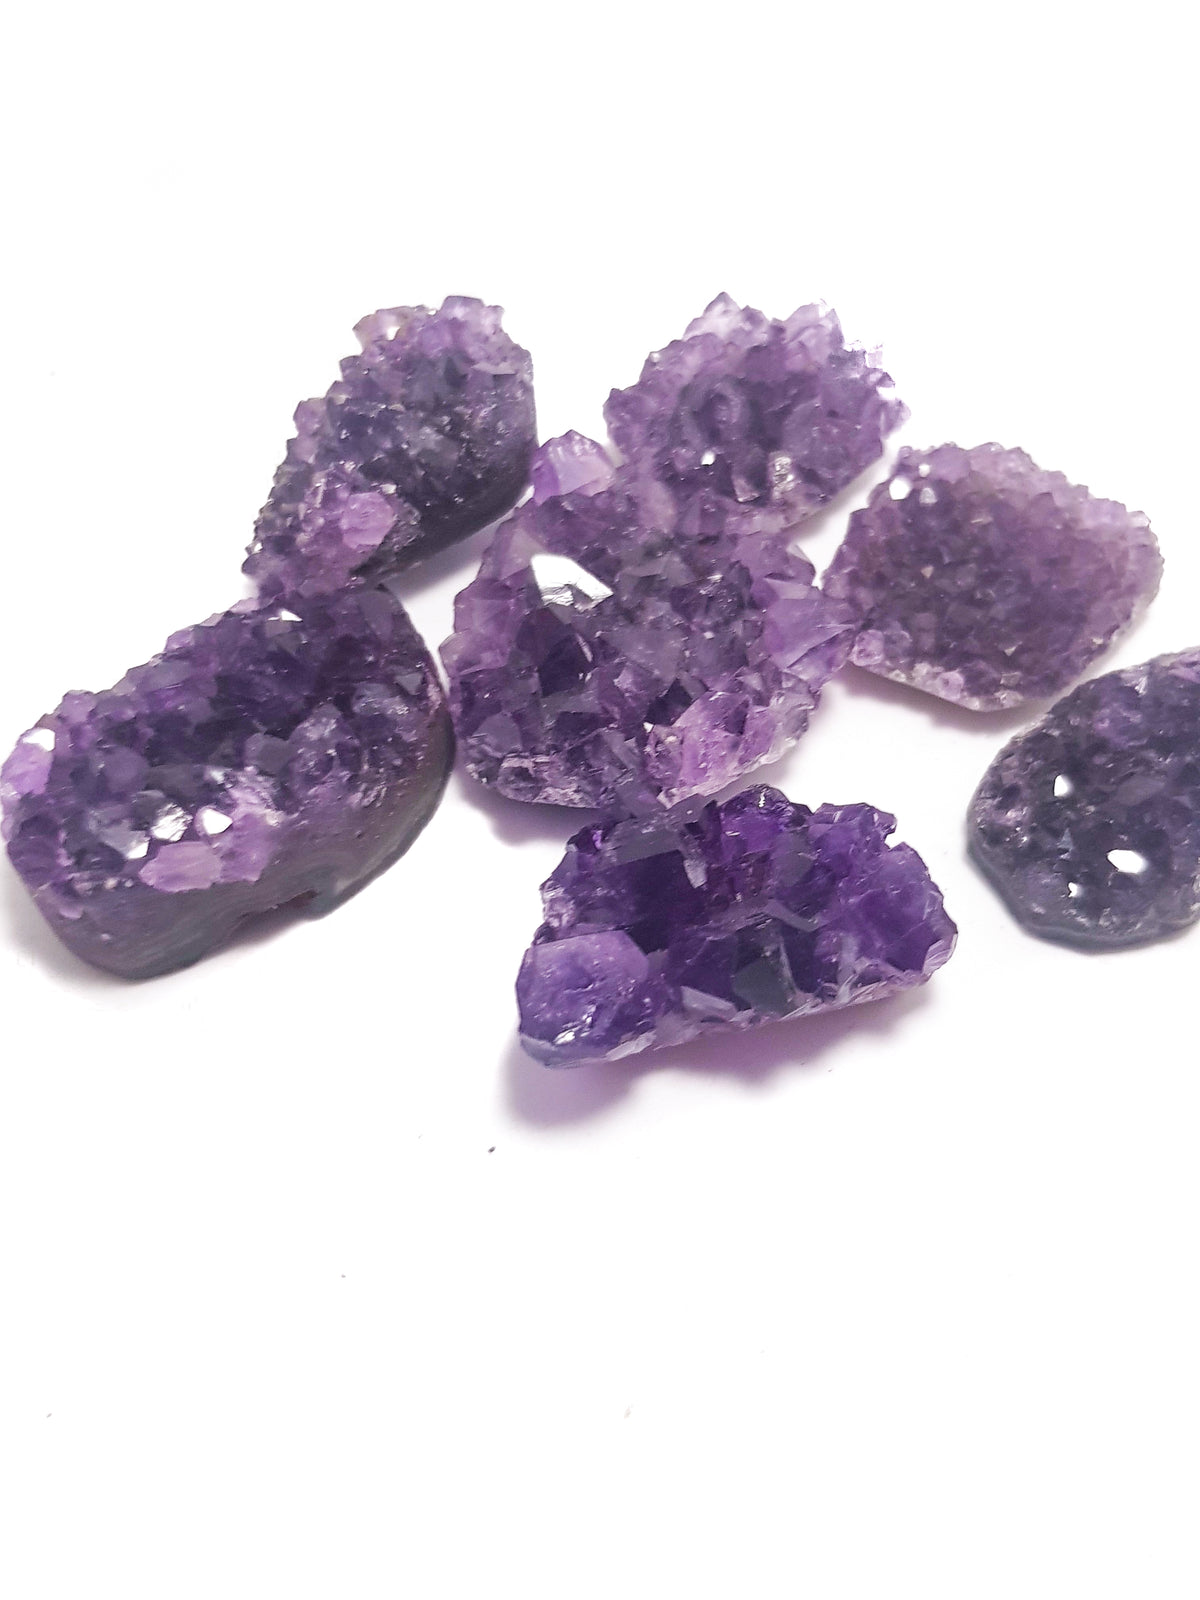 multiple small pieces (2.5 cm or less) of druzy amethyst